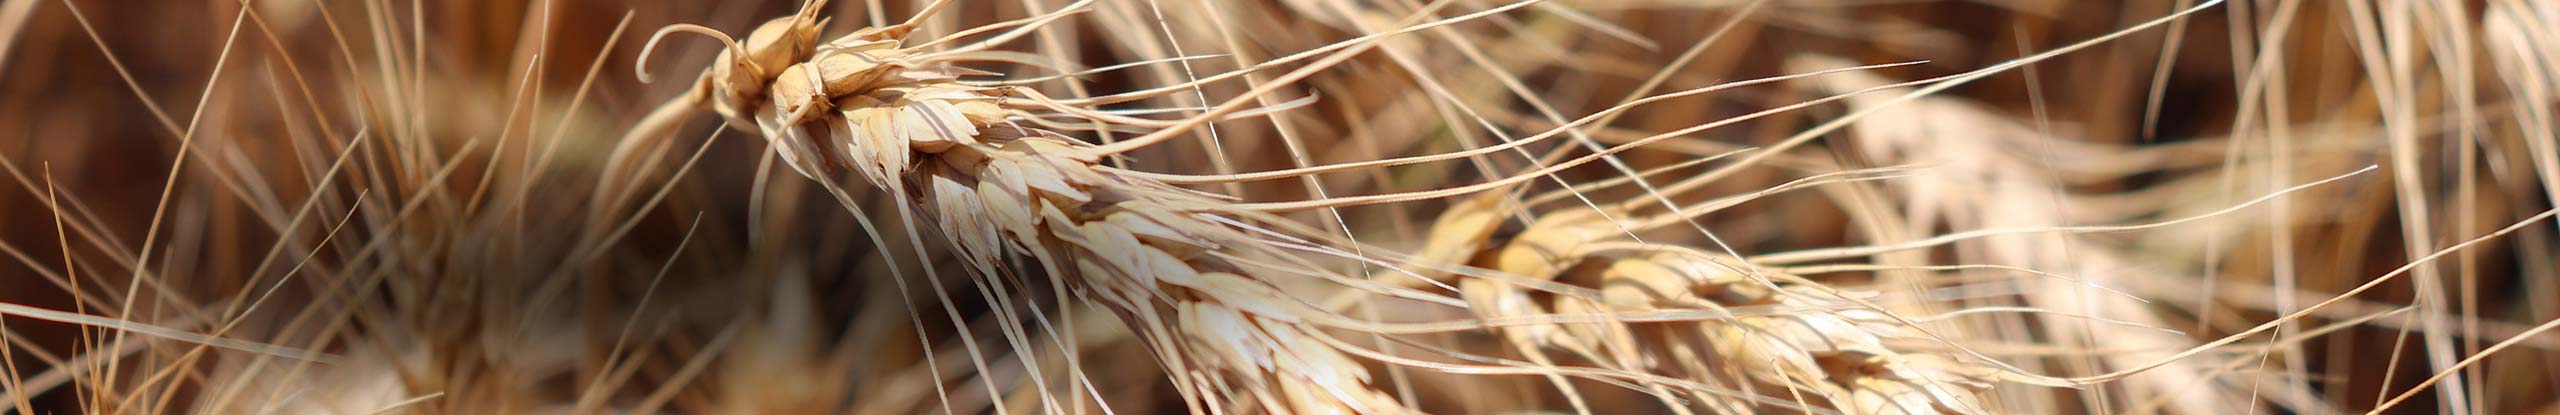 Managing Late Tillers in Wheat and Barley